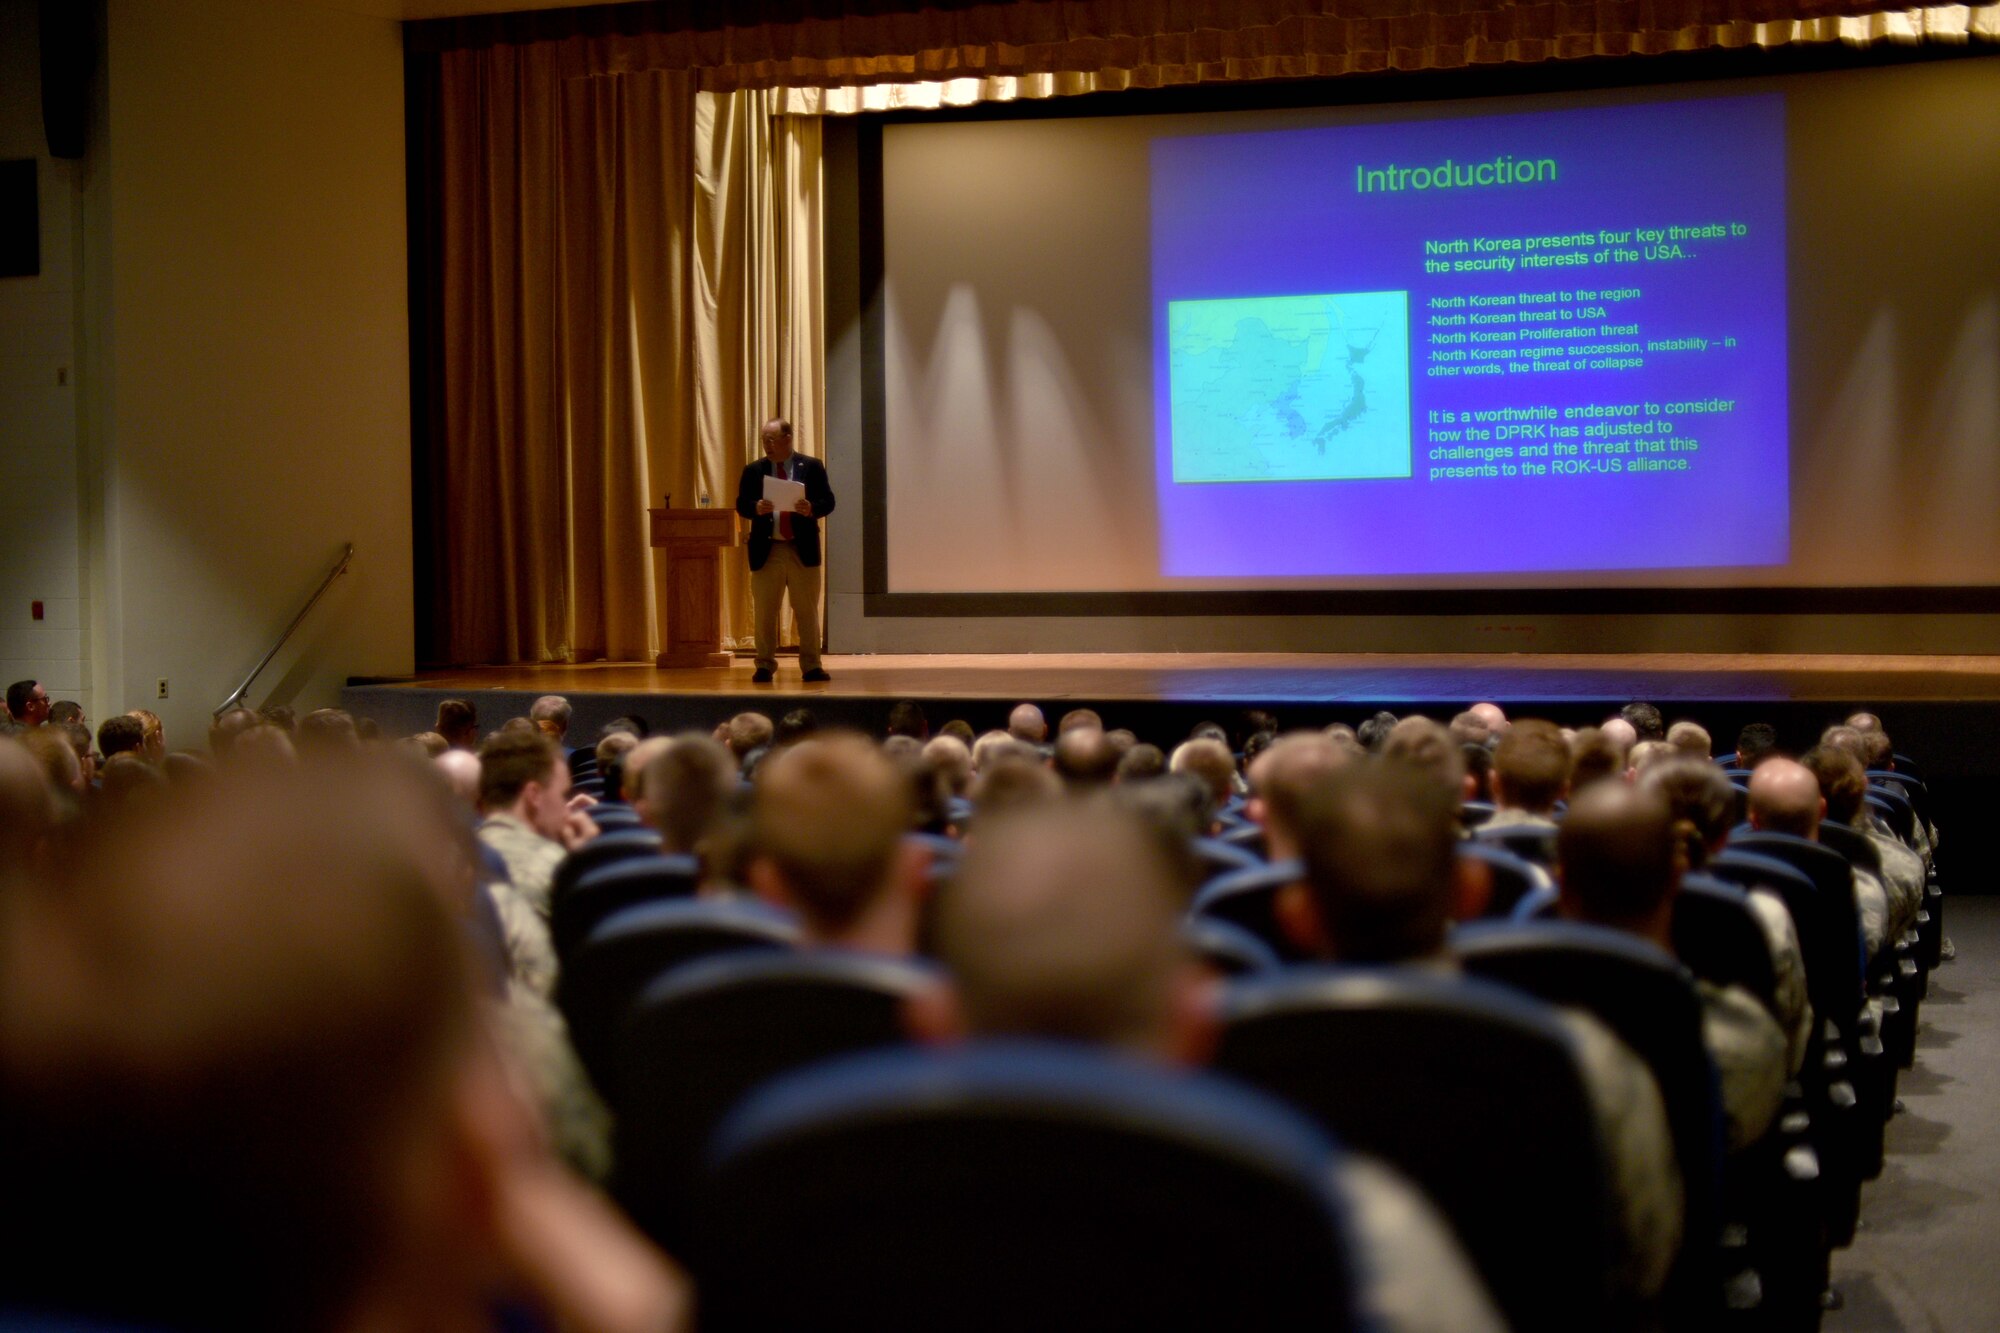 Dr. Bruce Bechtol, Angelo State University political science professor, gives a presentation in the Base Theater on Goodfellow Air Force Base, Texas, Sept. 22, 2017. Bechtol discussed national security issues that the intelligence community faces now and in the future. (U.S. Air Force photo by Airman 1st Class Randall Moose/Released)